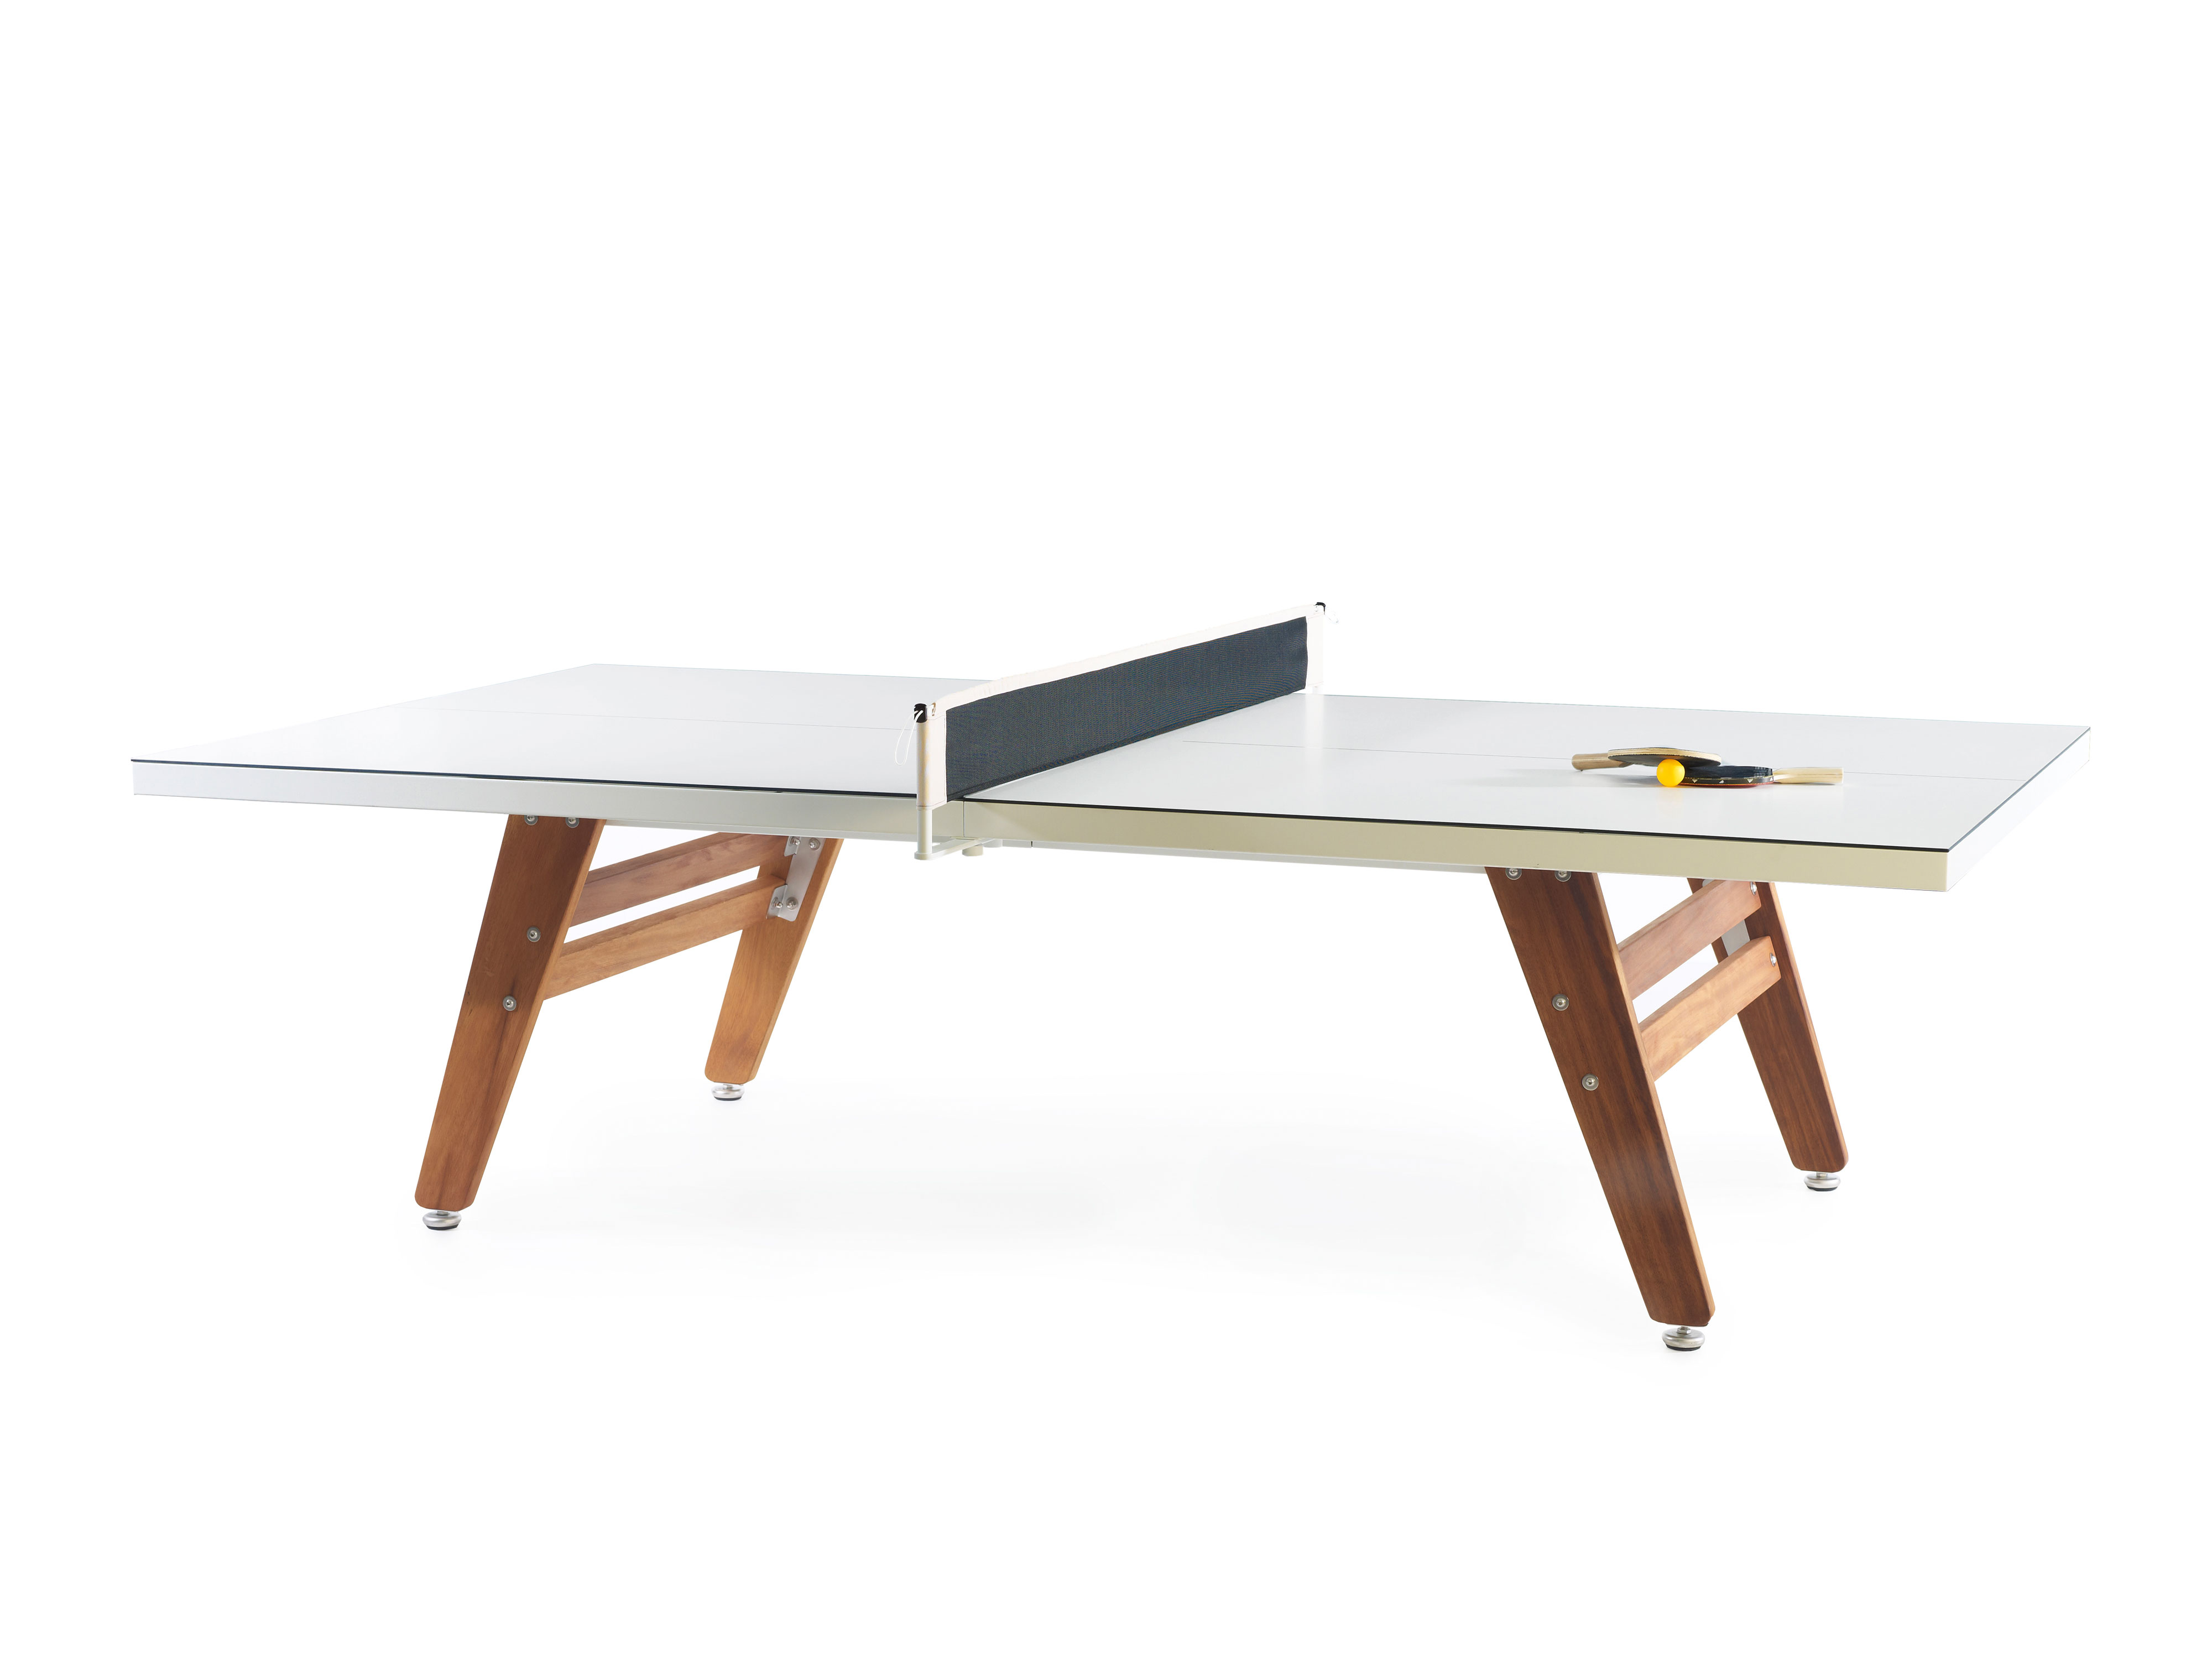 Table tennis table "Strong" - design RS#PingPong stationary from RS Barcelona 